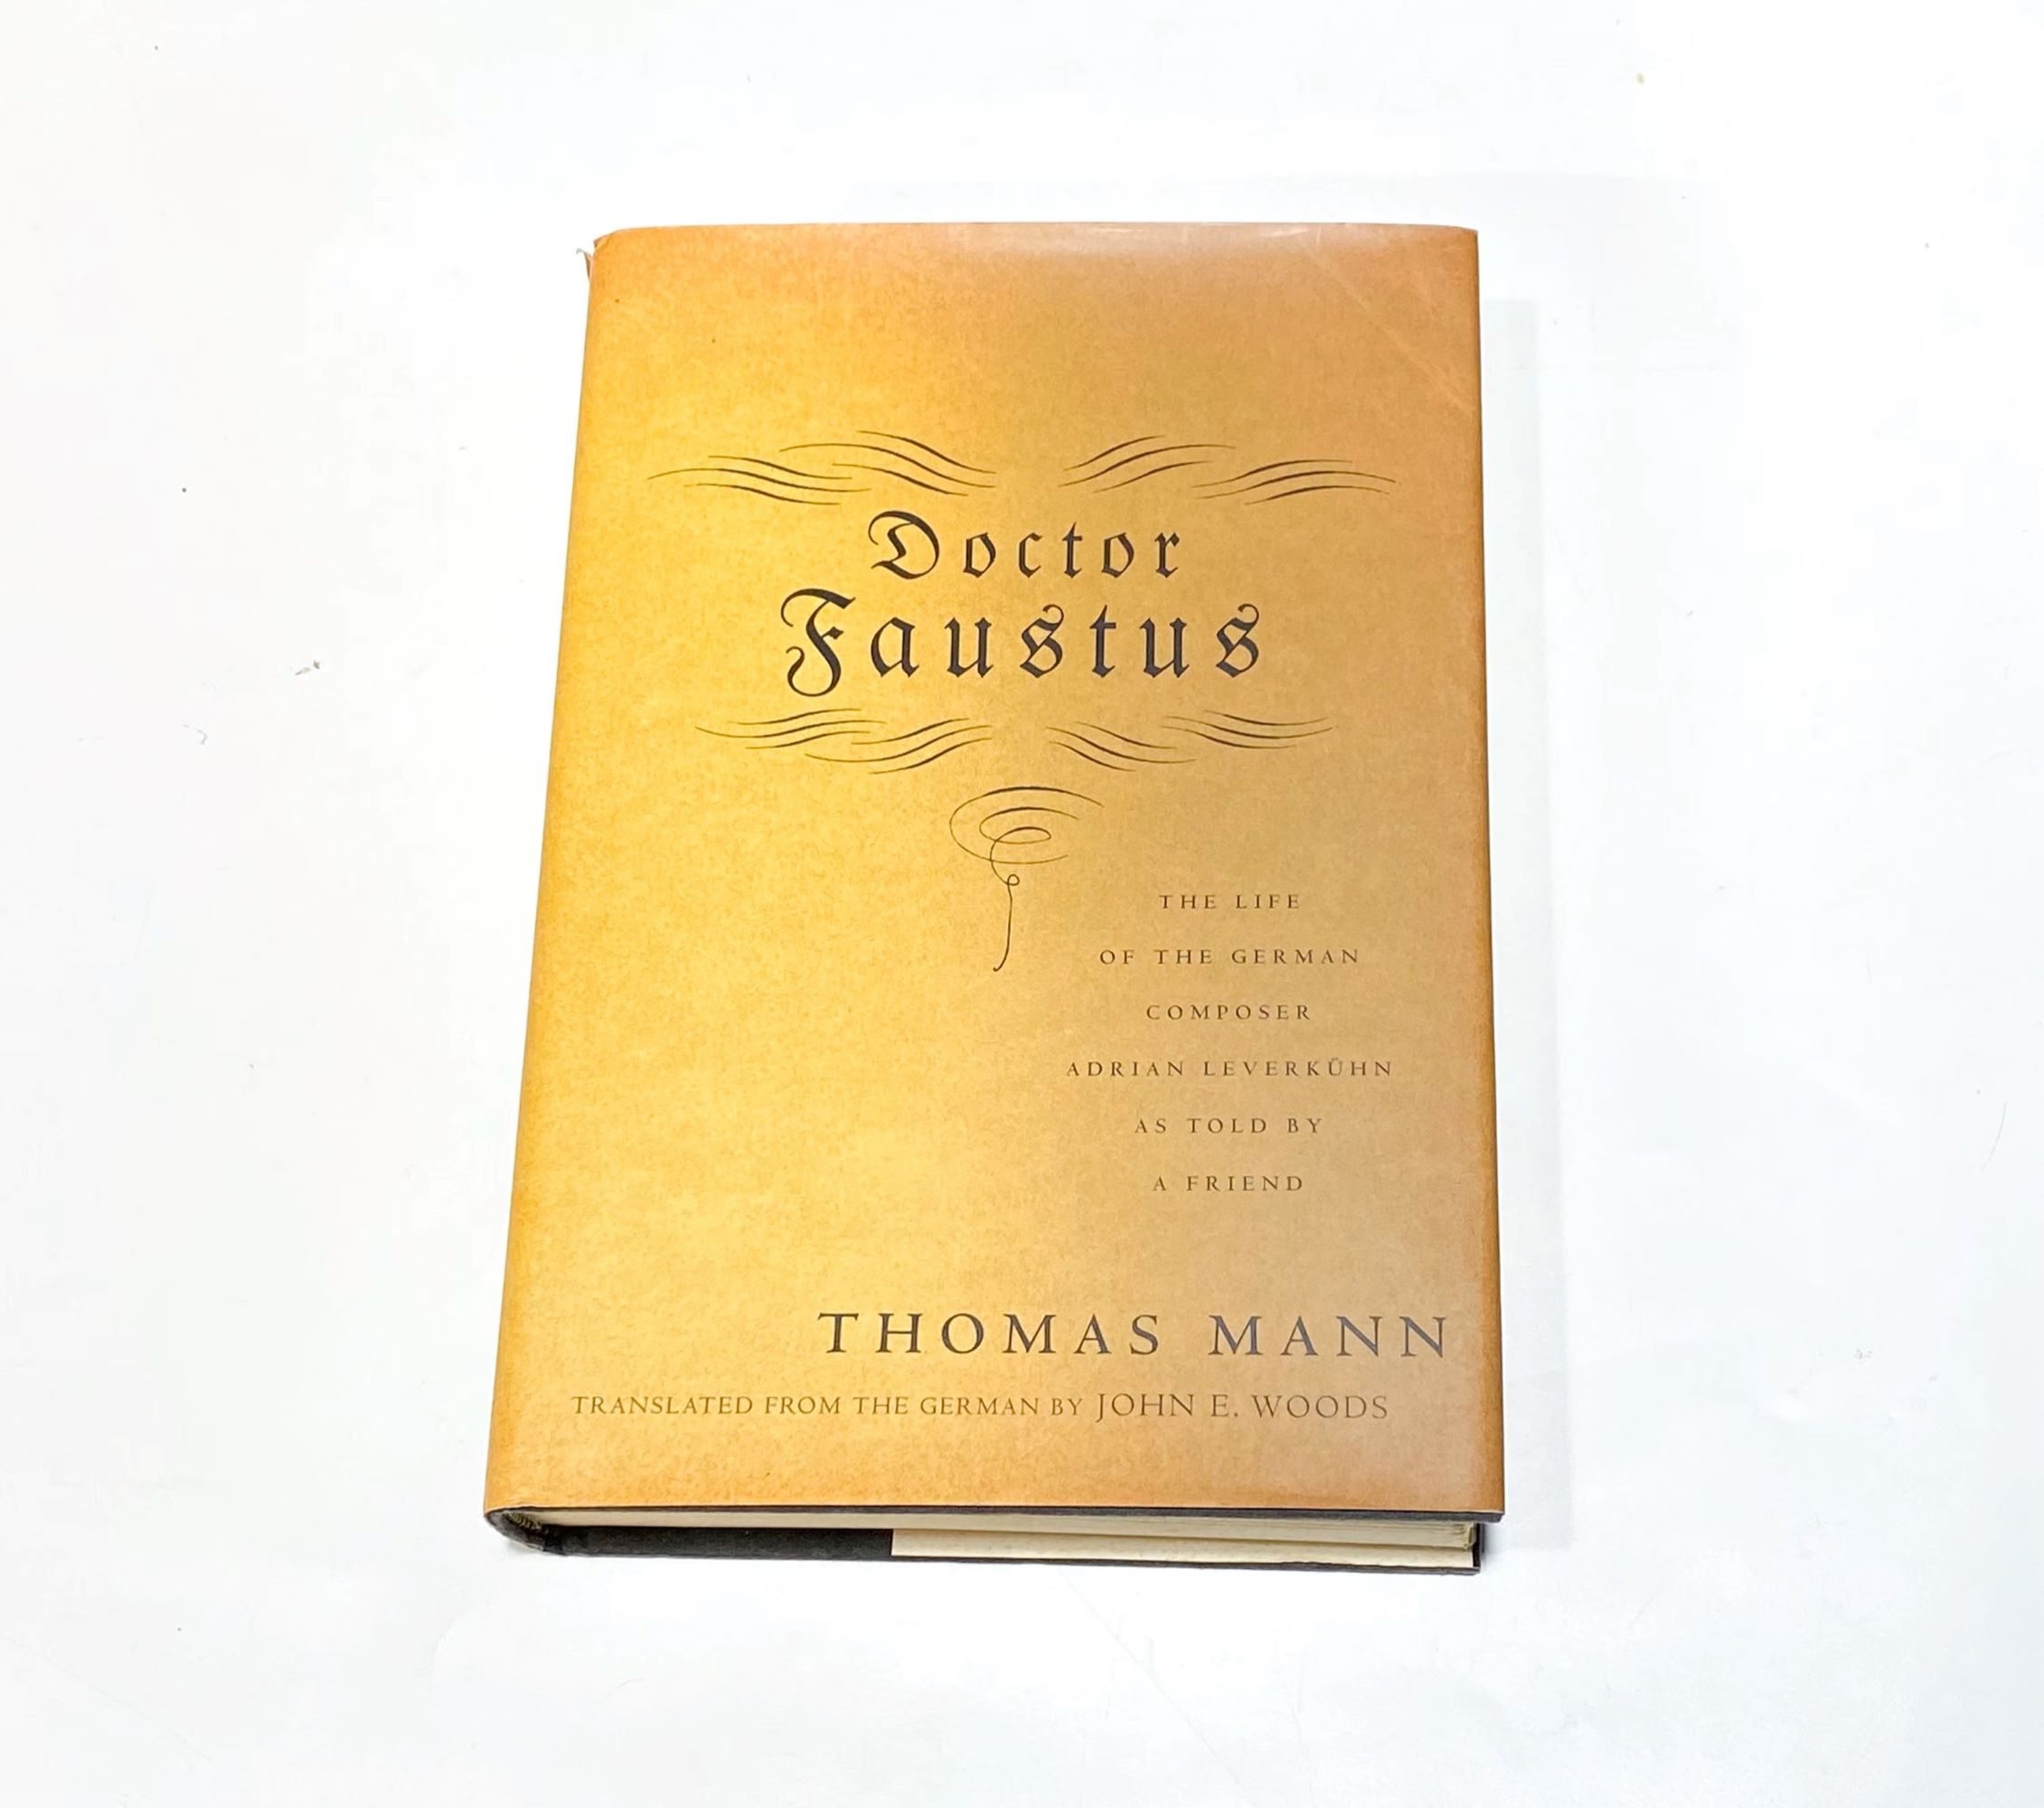 17-astonishing-facts-about-doctor-faustus-thomas-mann